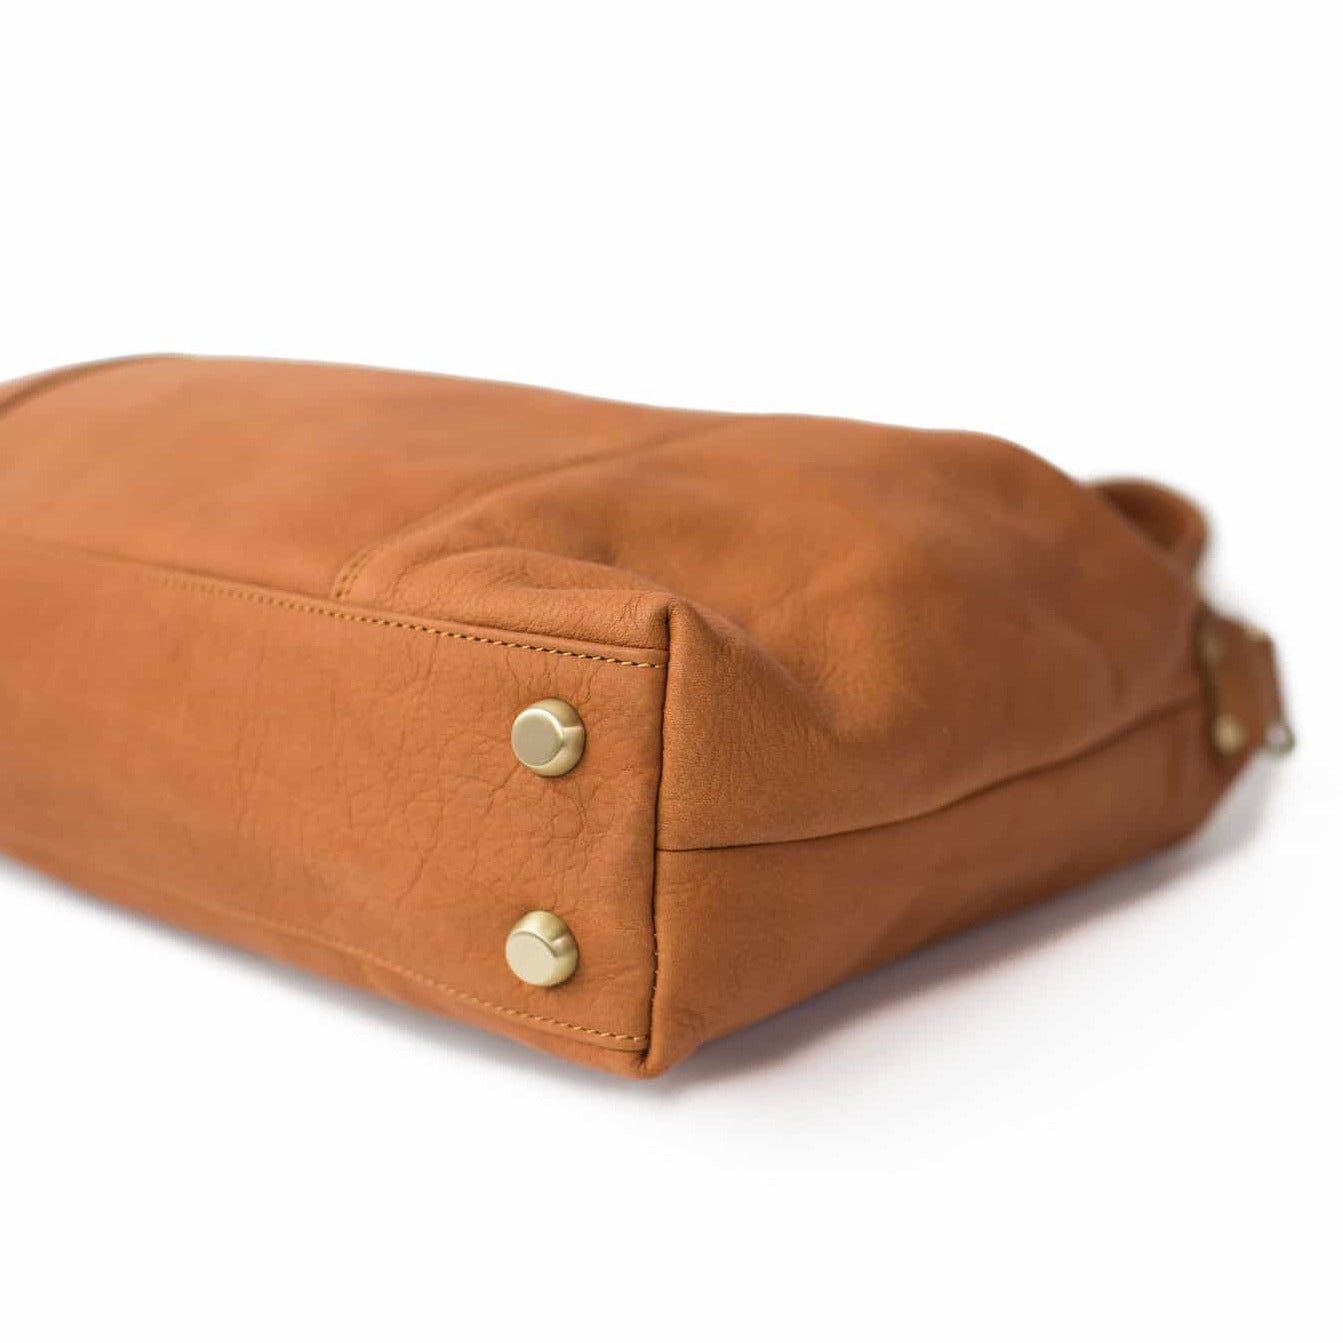 Linda Jean handbag in whisky tan raw leather has metal feet on the bottom to keep your bag protected.